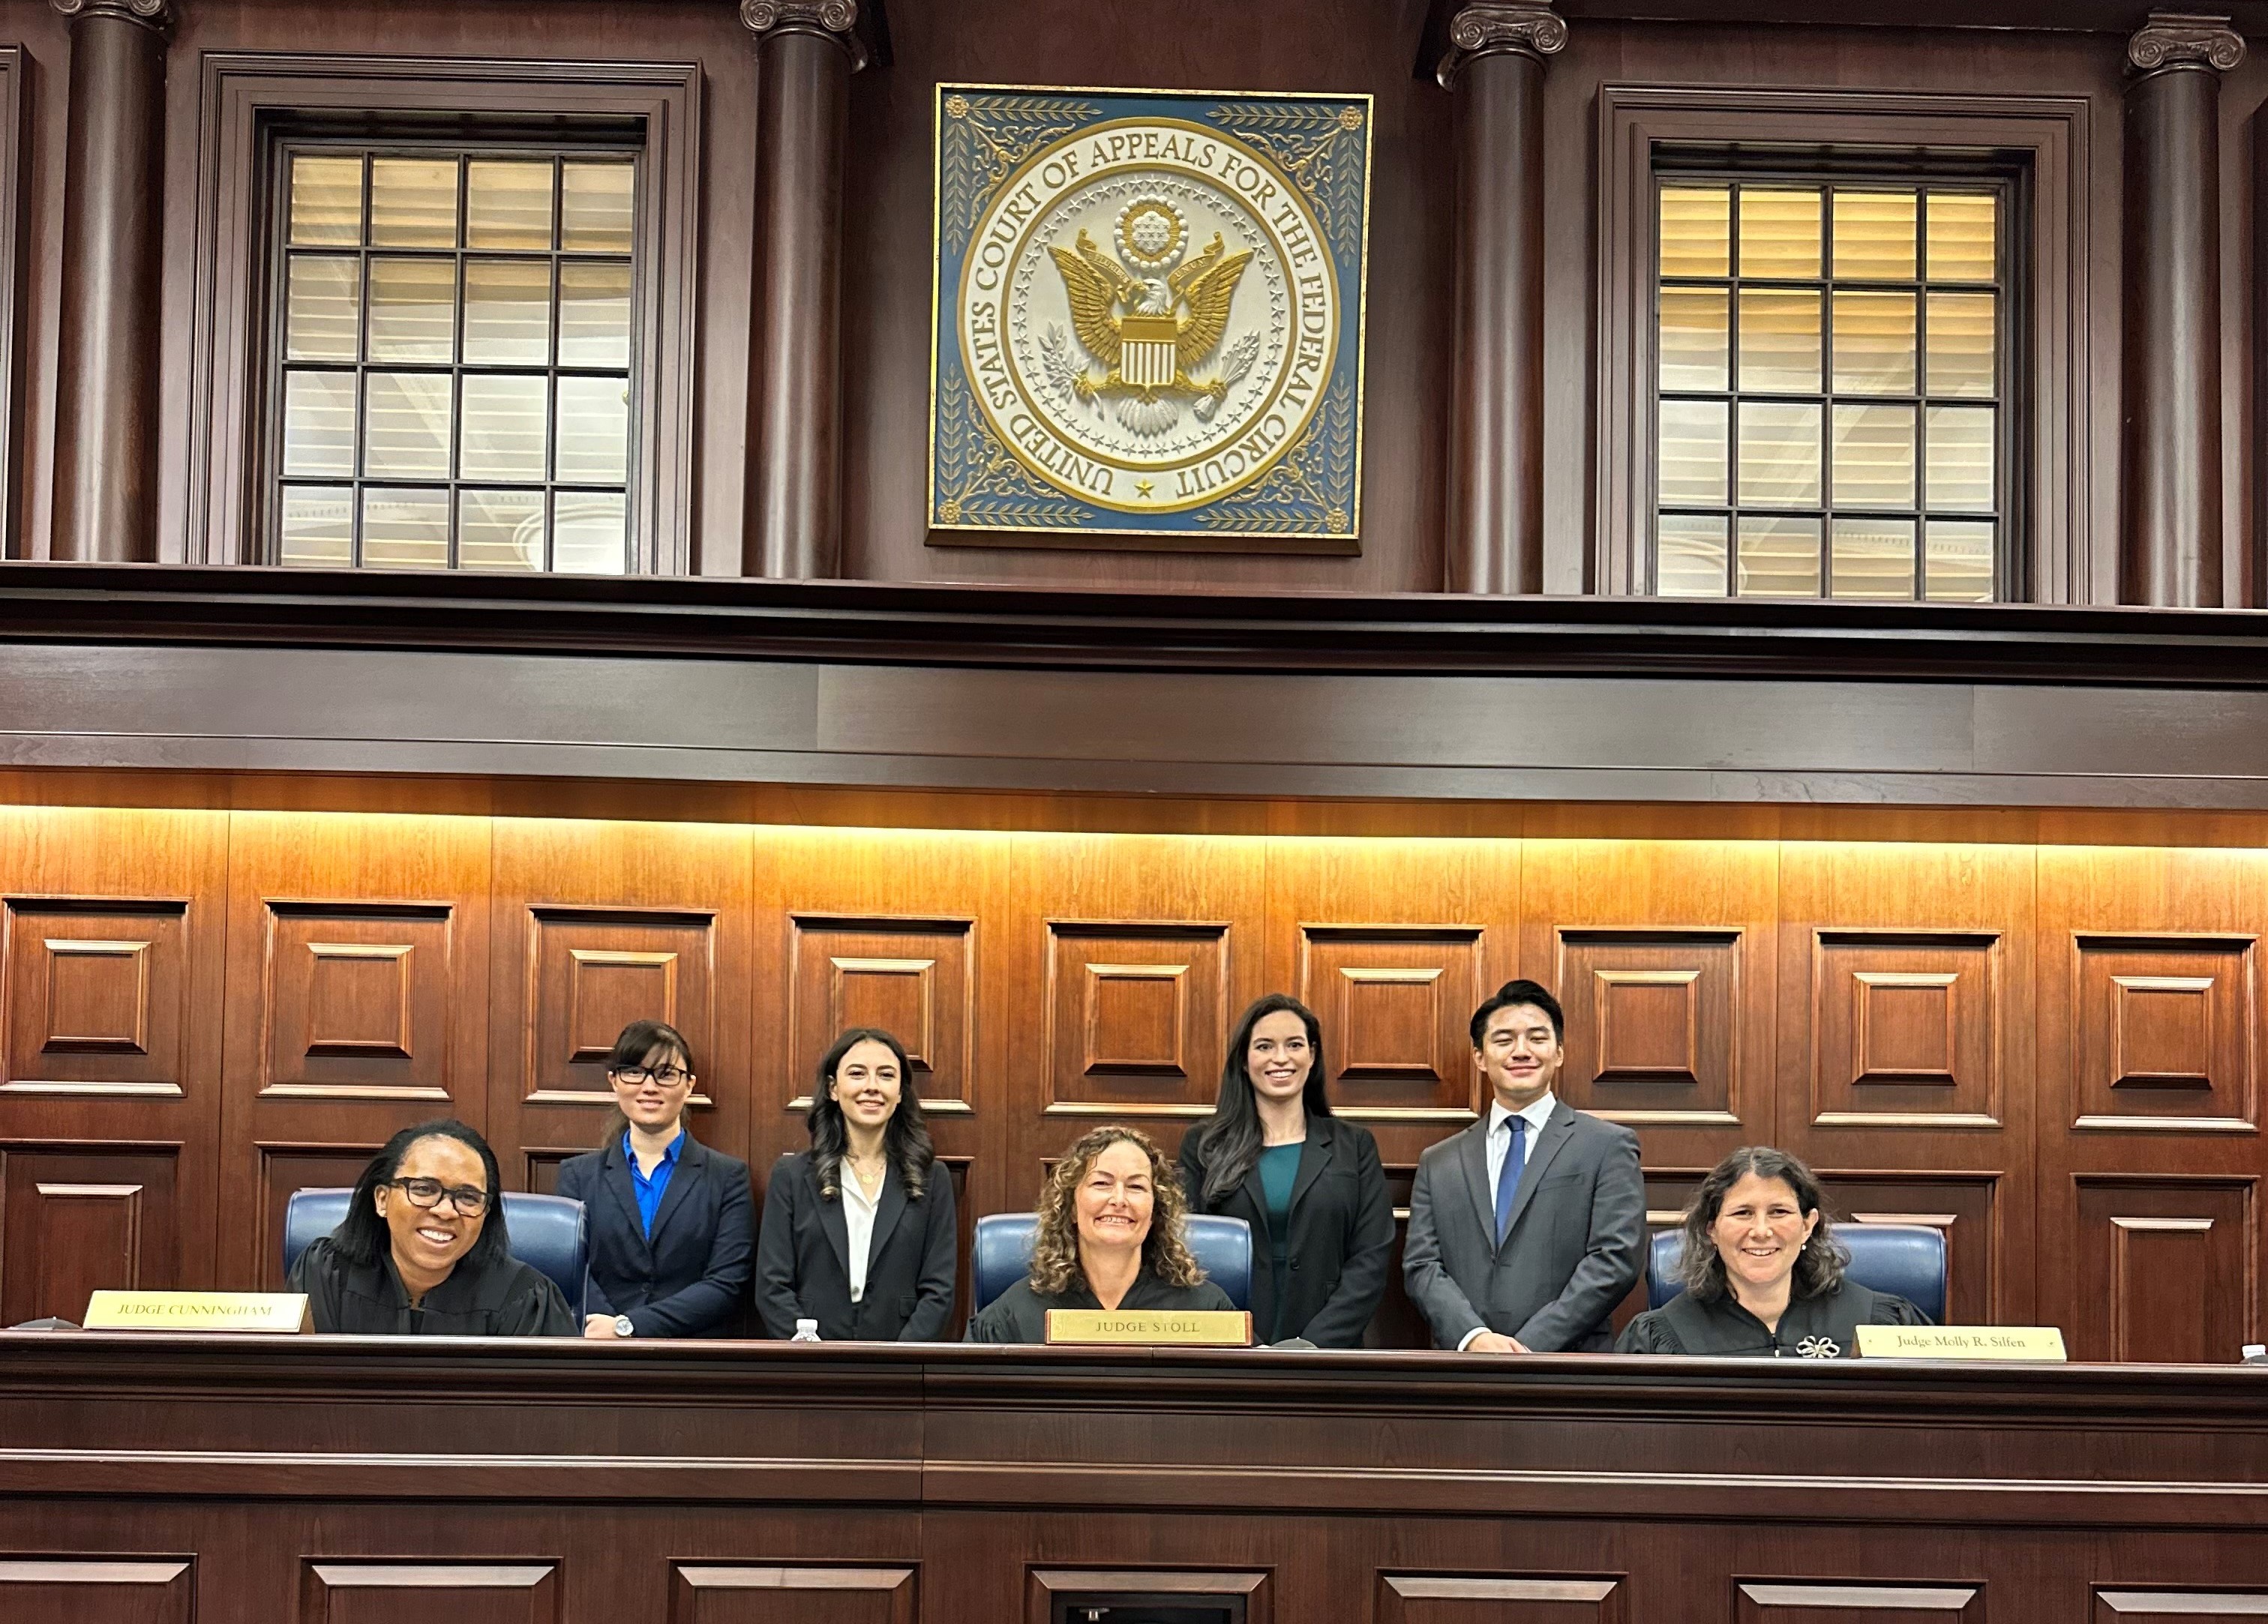 The judges and finalists at the U. S. Court of Appeals for the Federal Circuit in Washington